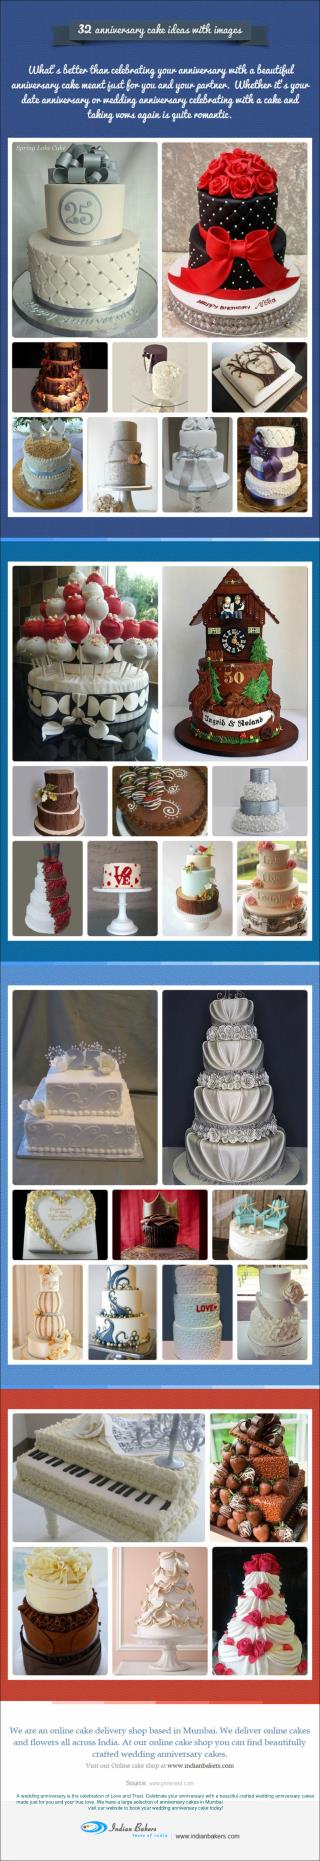 32 Anniversary Cake Ideas with Images